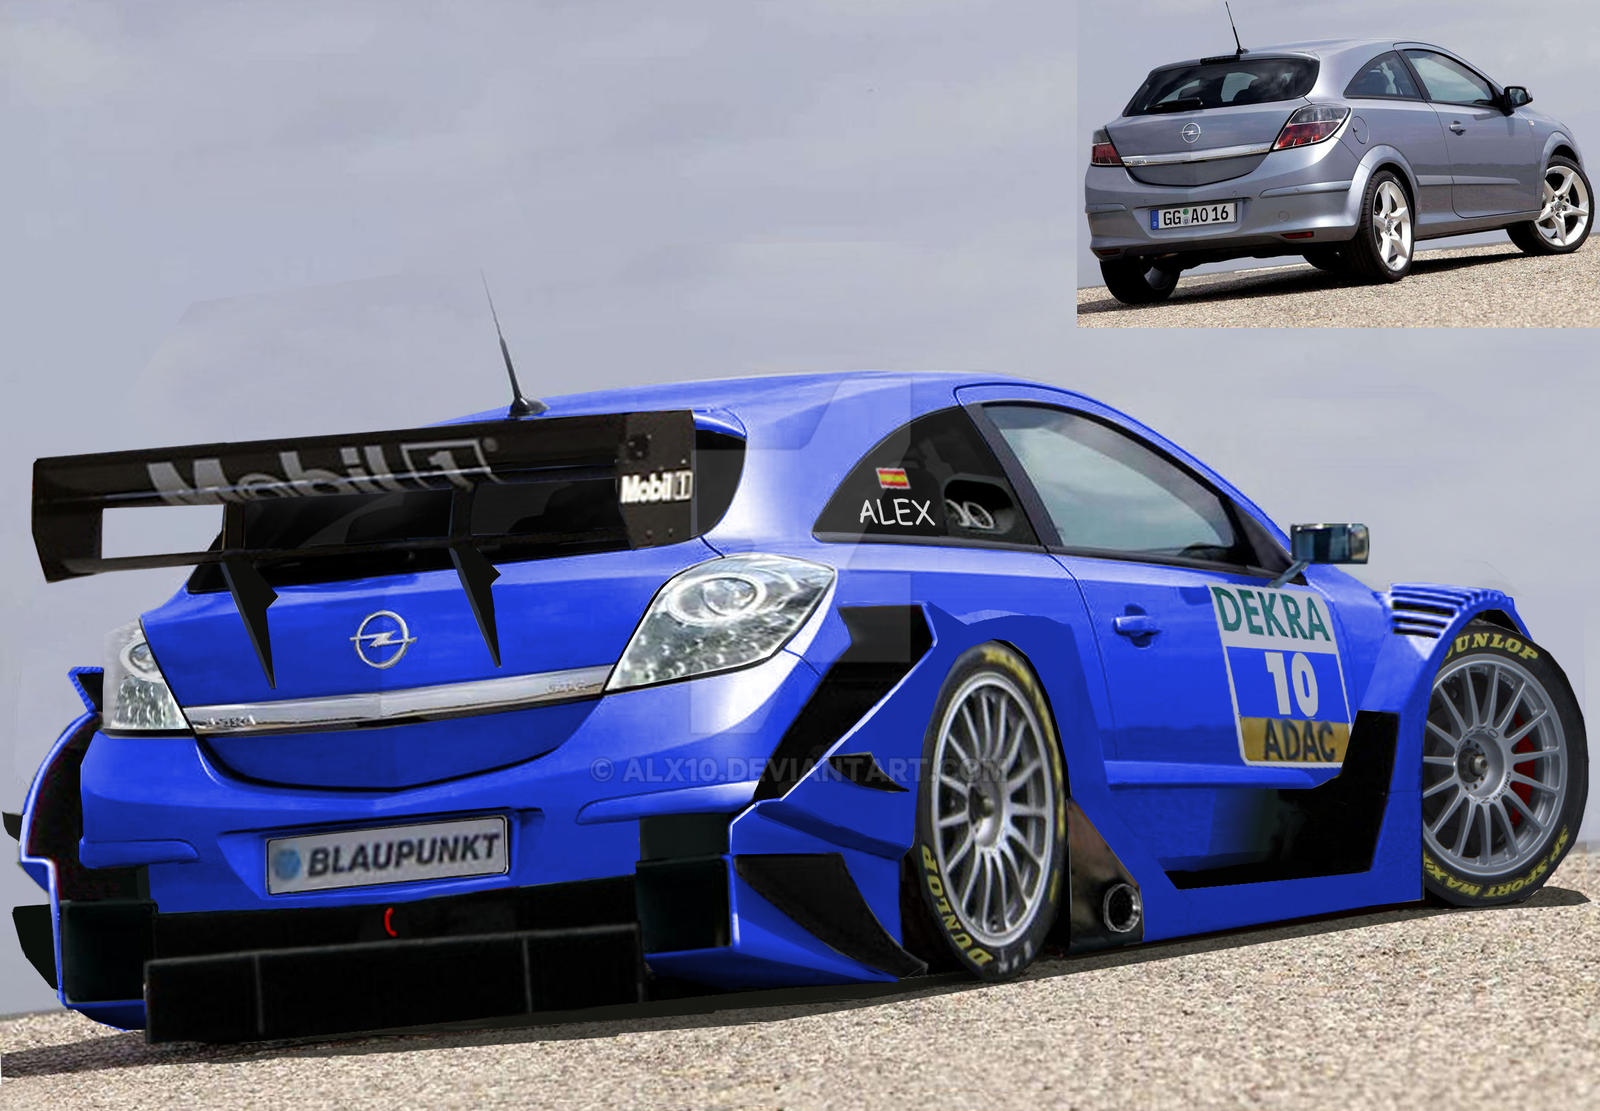 Opel Astra h OPC. Opel Astra h OPC Tuning. Opel Astra DTM.